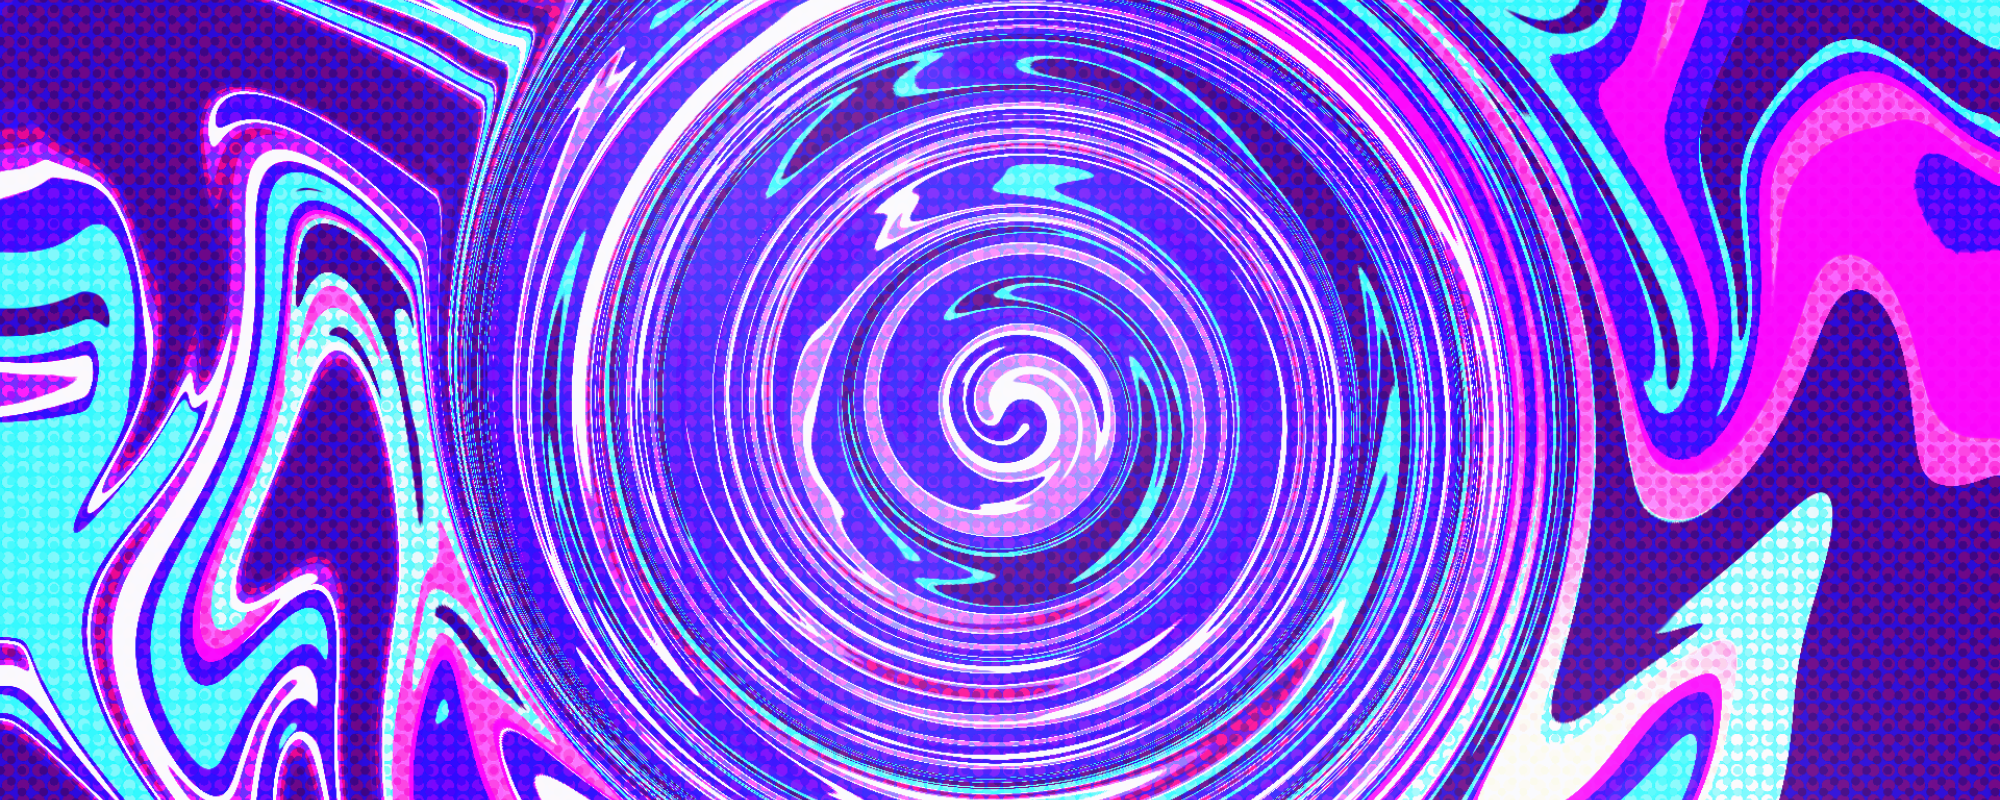 image of purple blue and pink spiral design